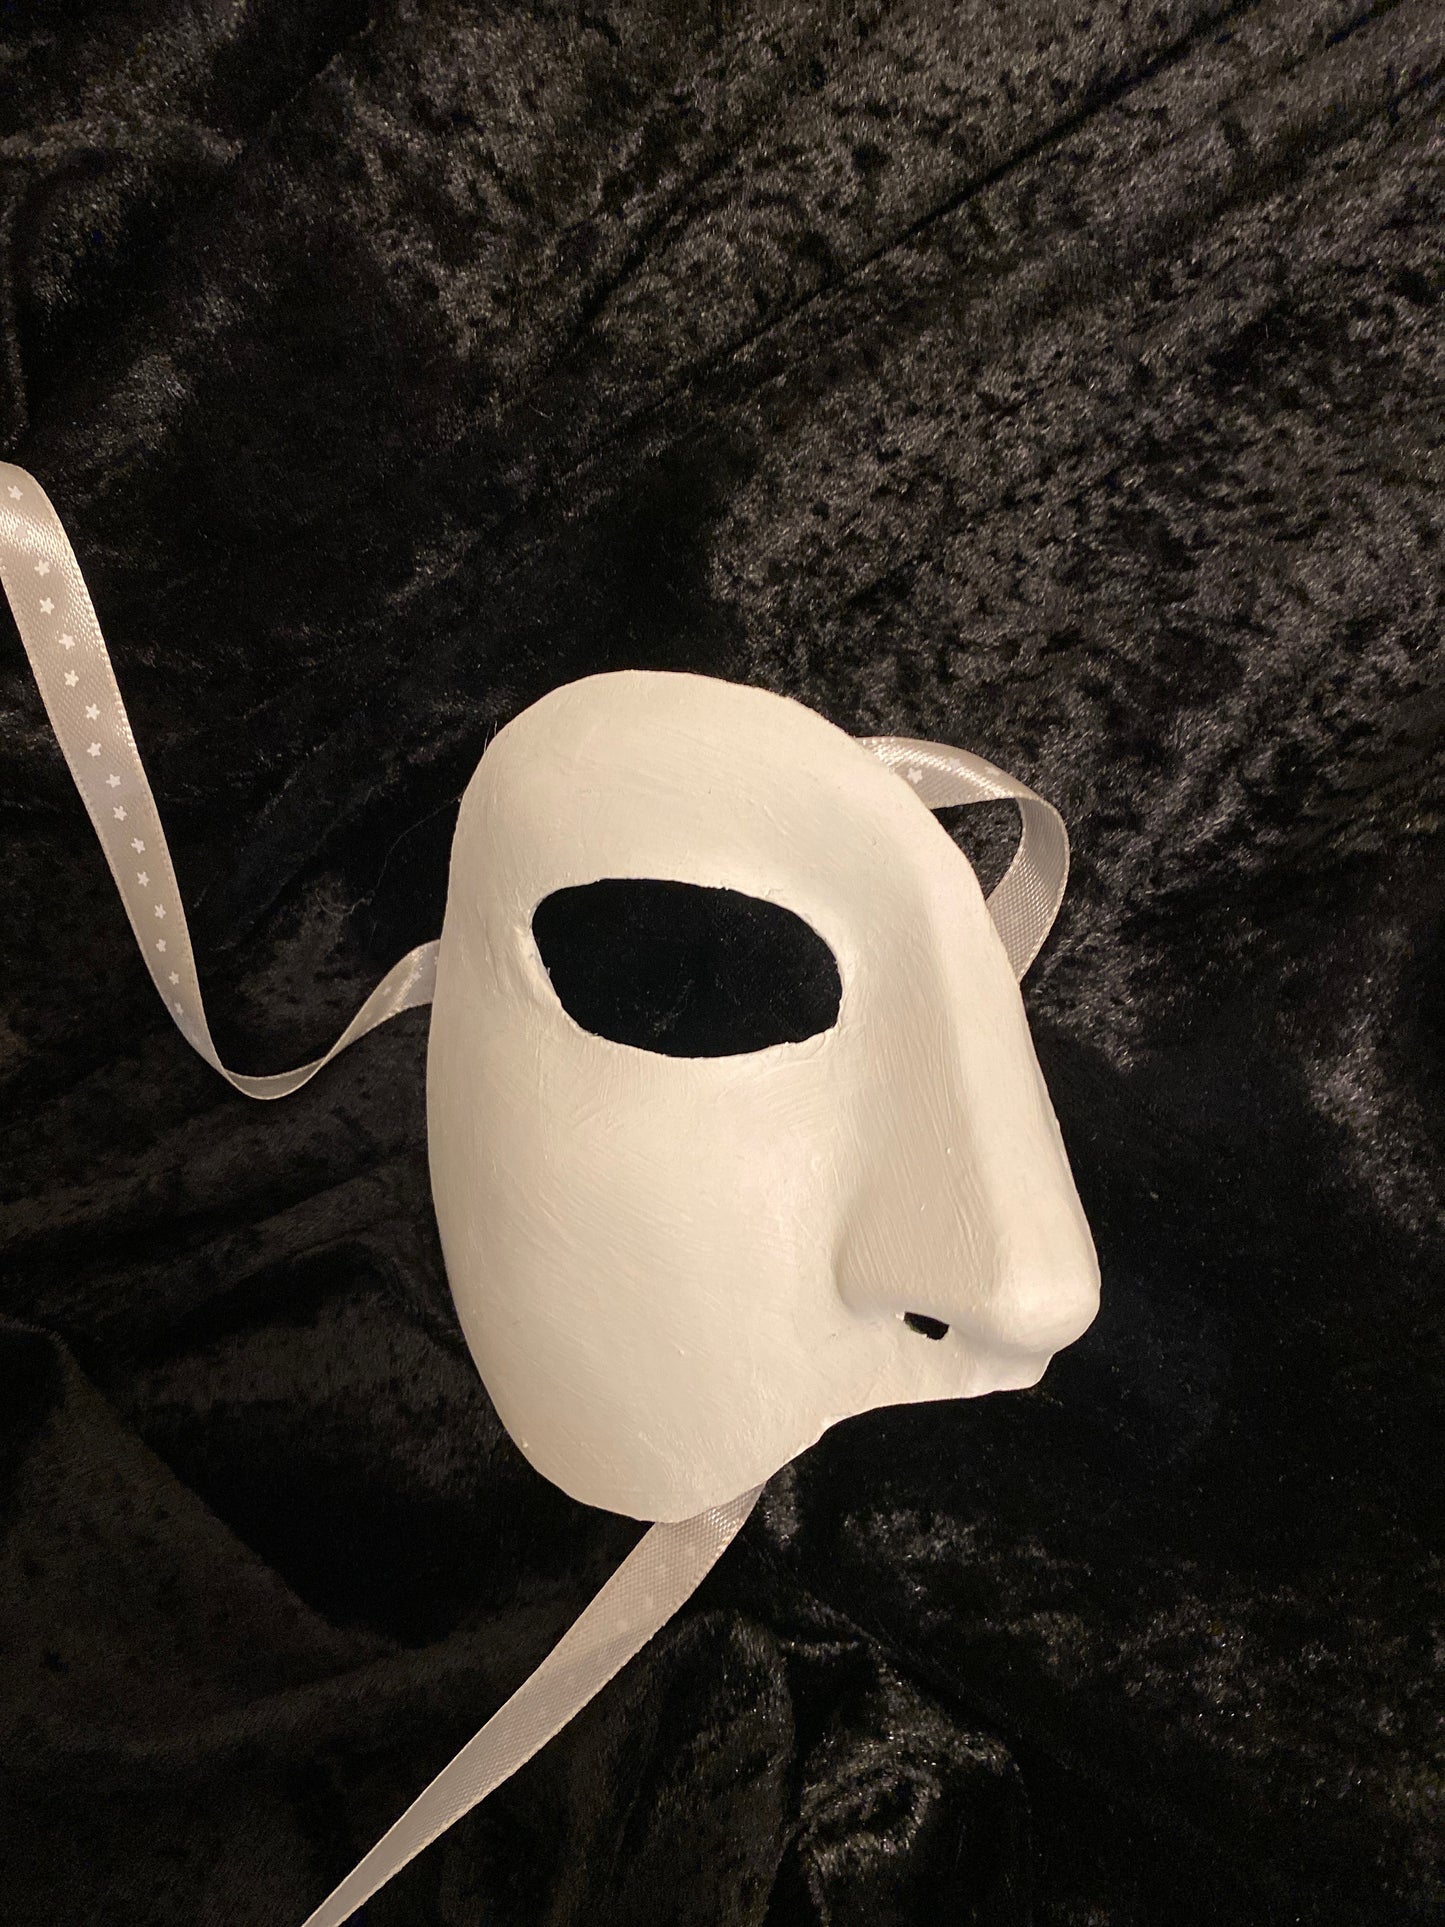 Original Phantom of the opera mask for sale. Venetian Original piece Handmade. Traditional for parties and Halloween Half face Meaning Ghost